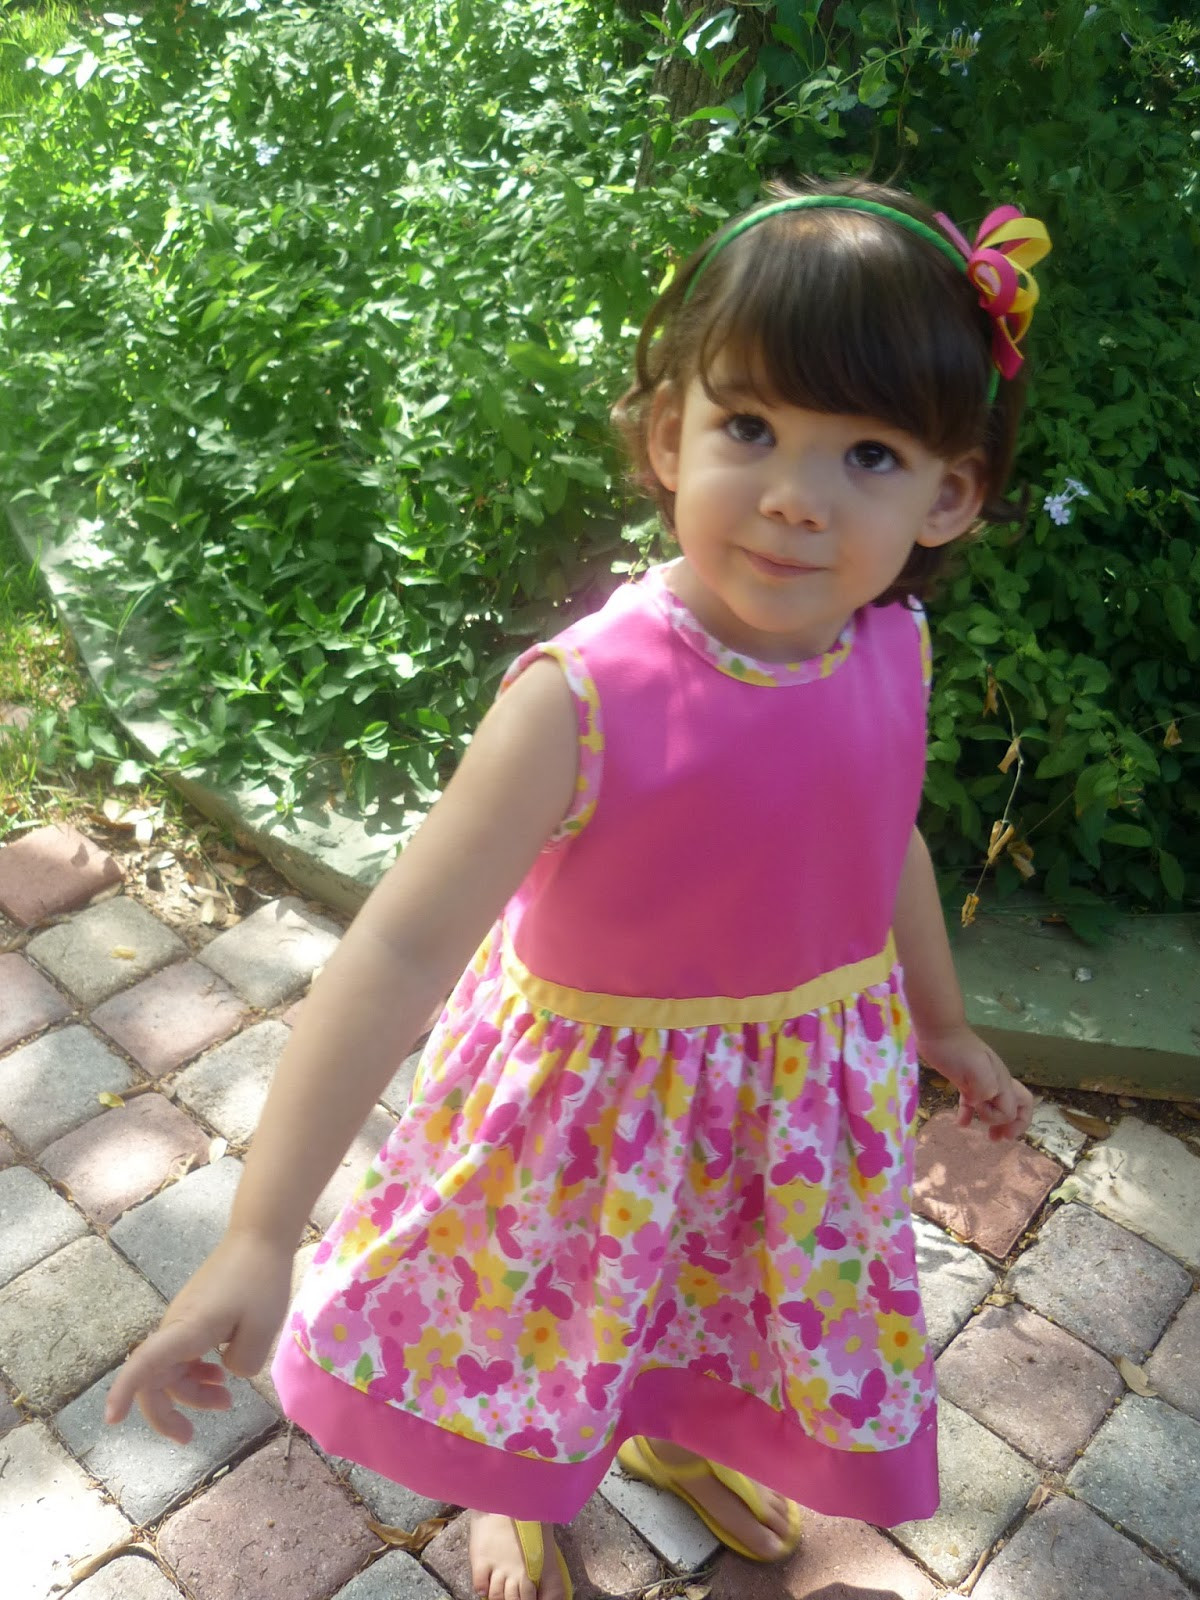 Gymboree Birthday Party Cost
 The Handy Dandy Helper DIY Butterfly Party Dress